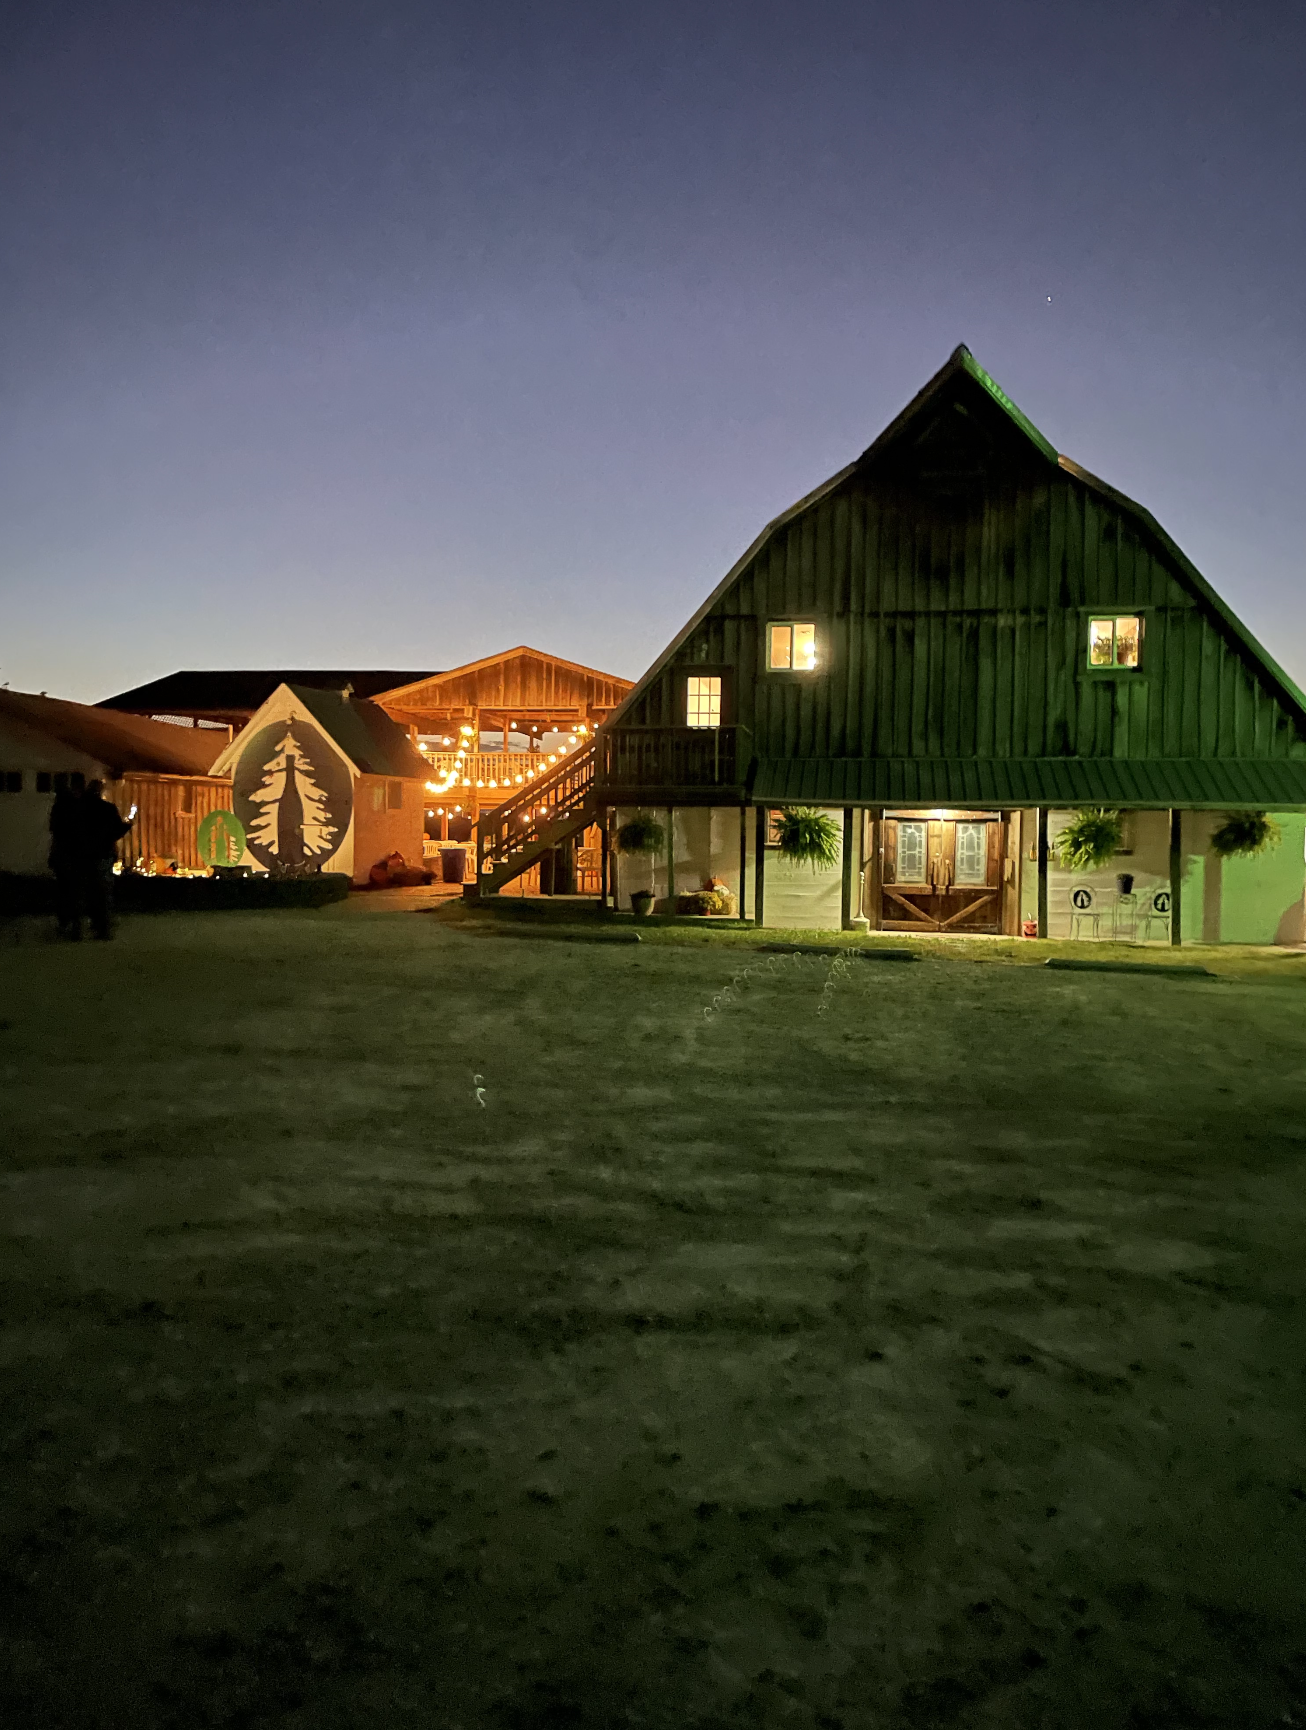 Prairie Barn Winery- The wooden barn style building lit up at night. 